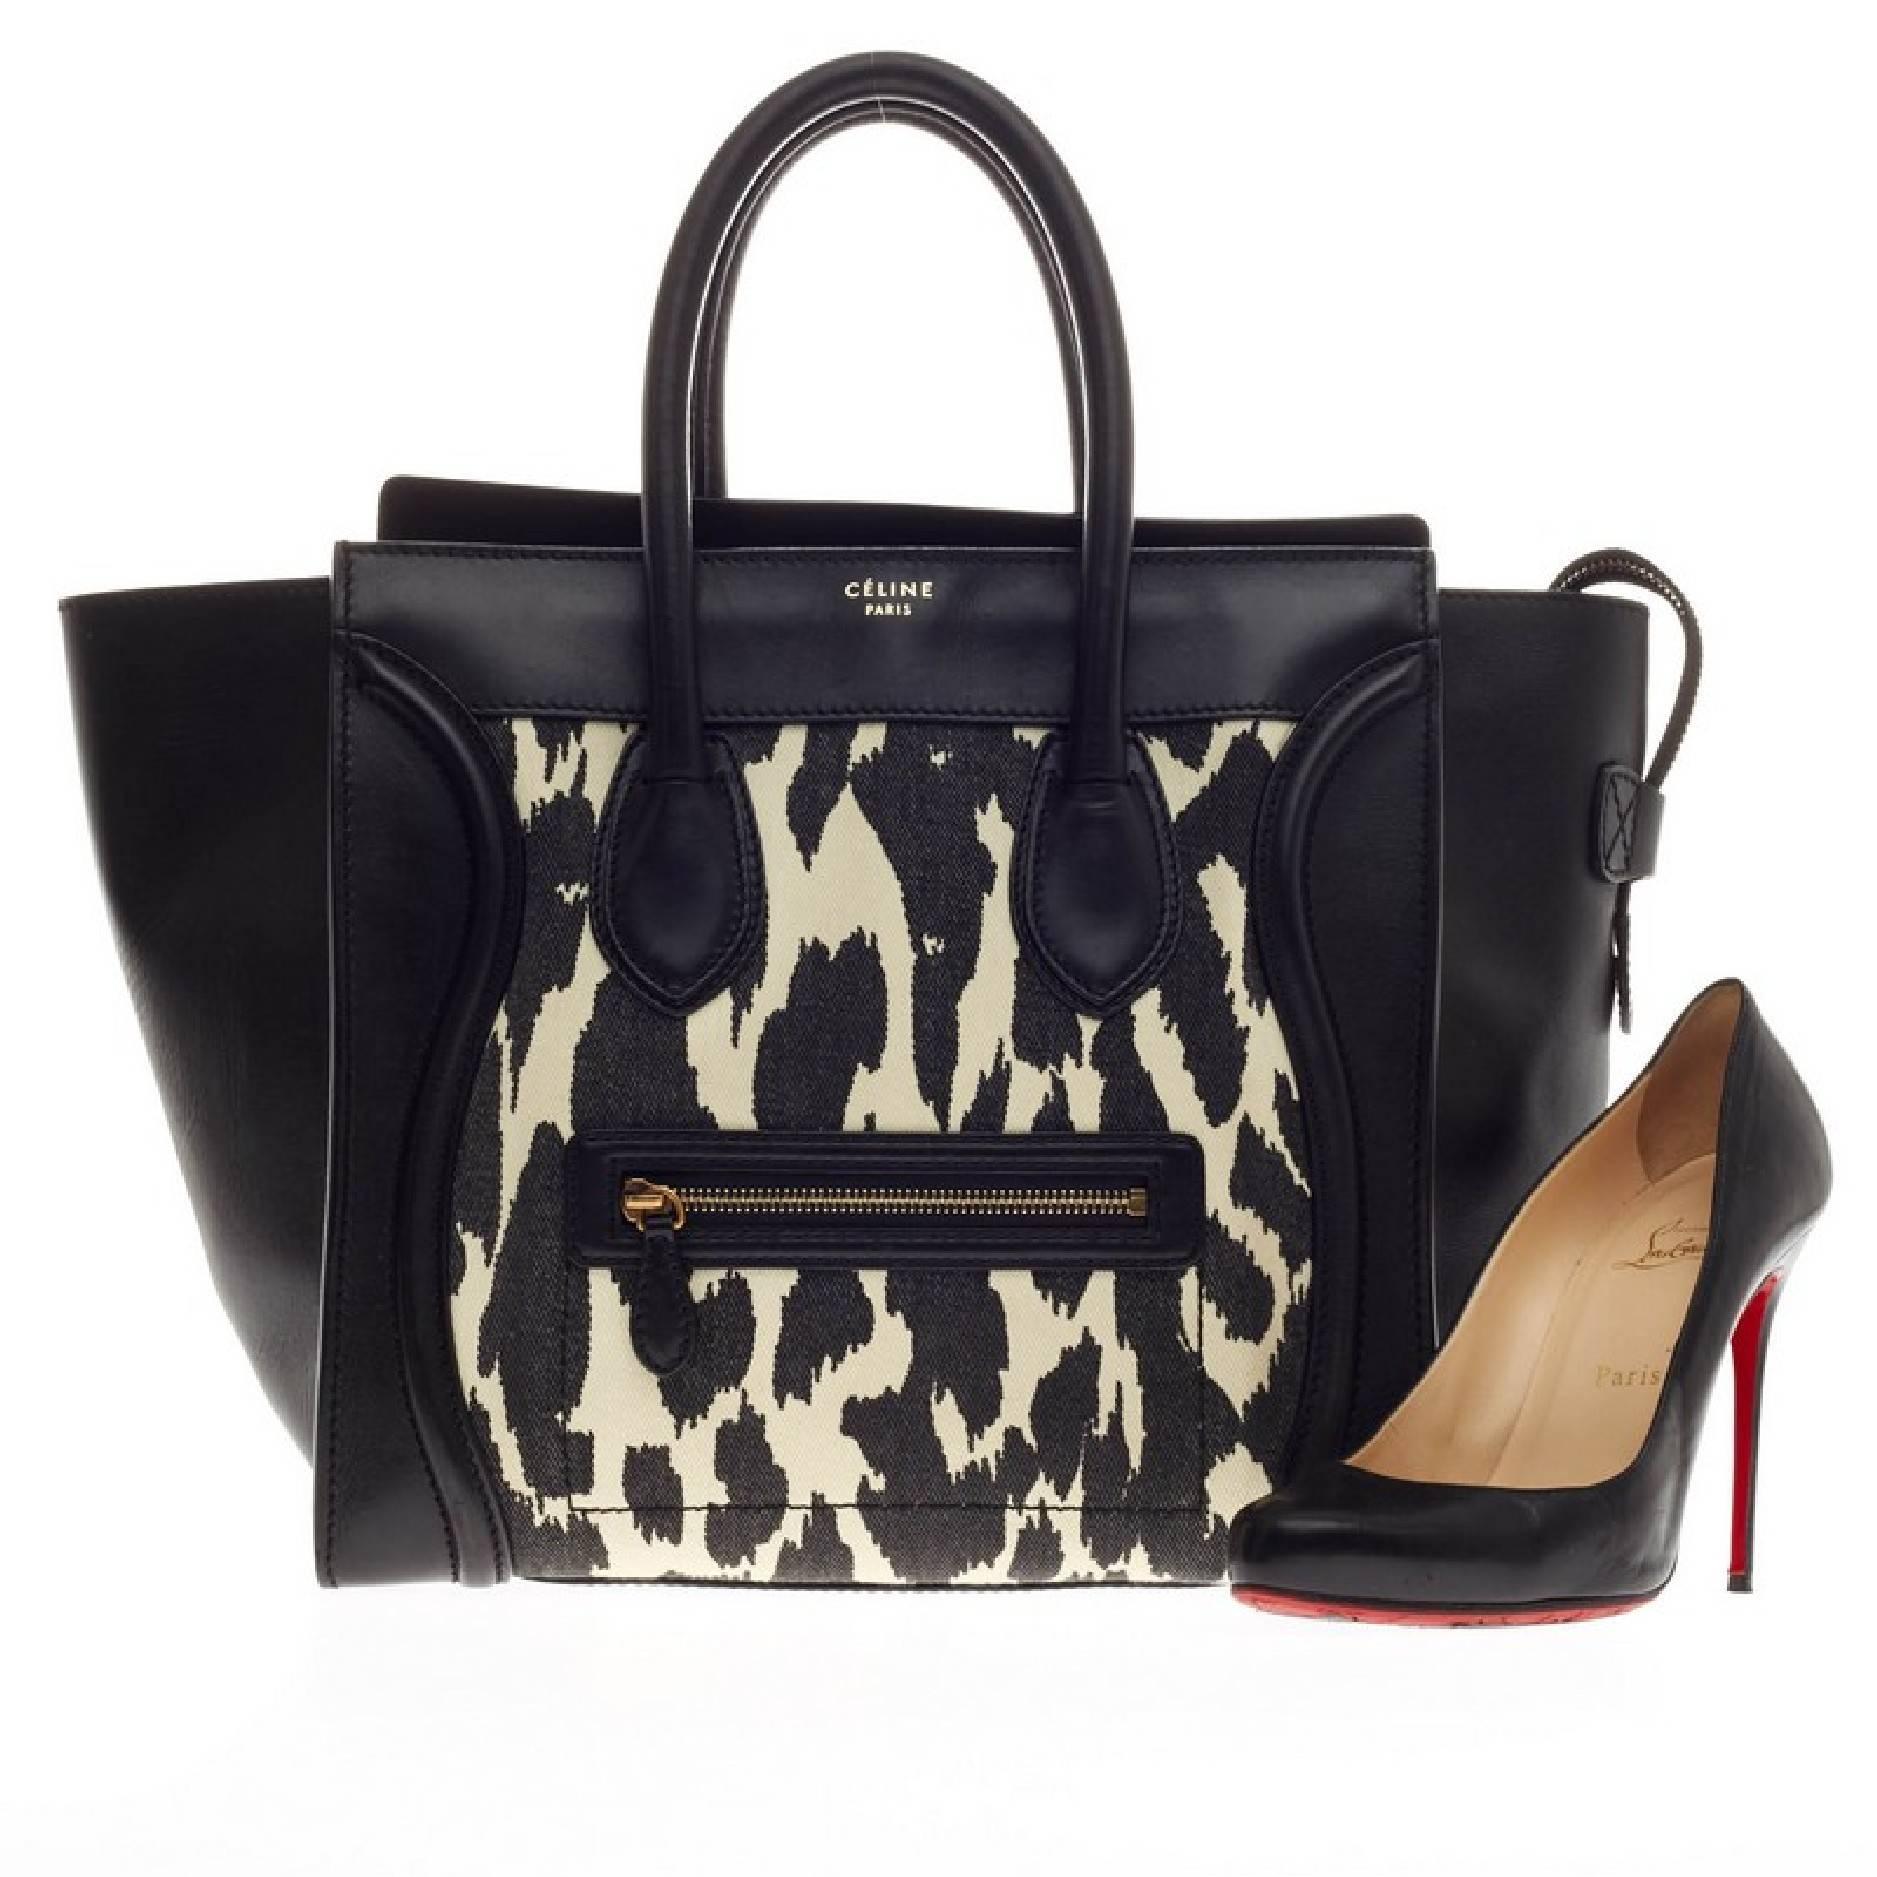 This authentic Celine Luggage Canvas and Leather Mini is the quintessential It bag beloved by many fashionistas. Constructed in black leather with a striking leopard print canvas design, this eye-catching yet stylish tote features dual-rolled